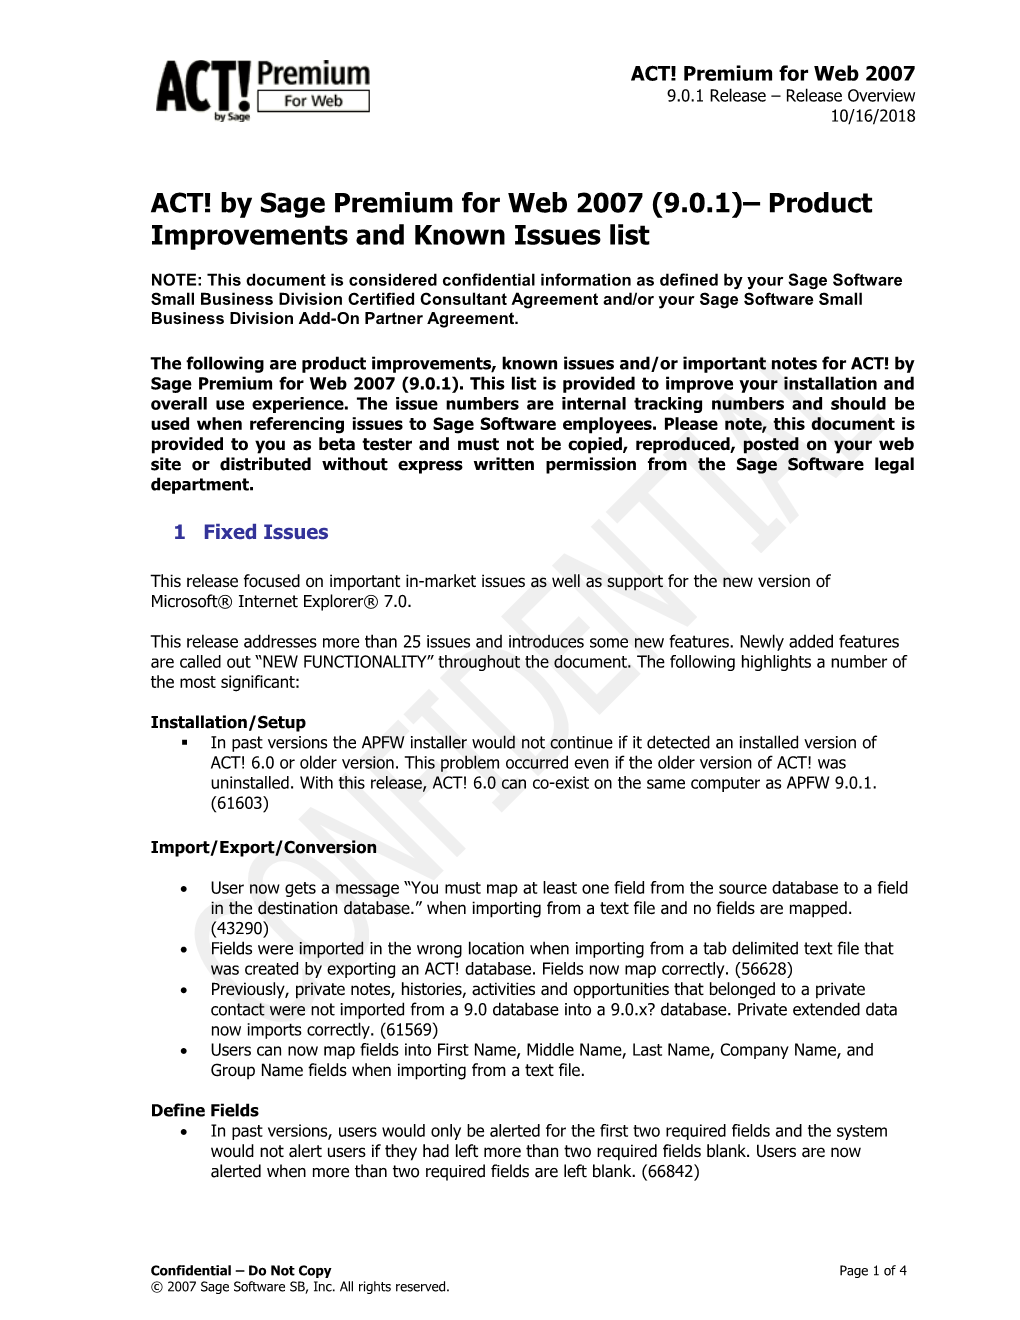 ACT! Premium for Web - Known Issues List